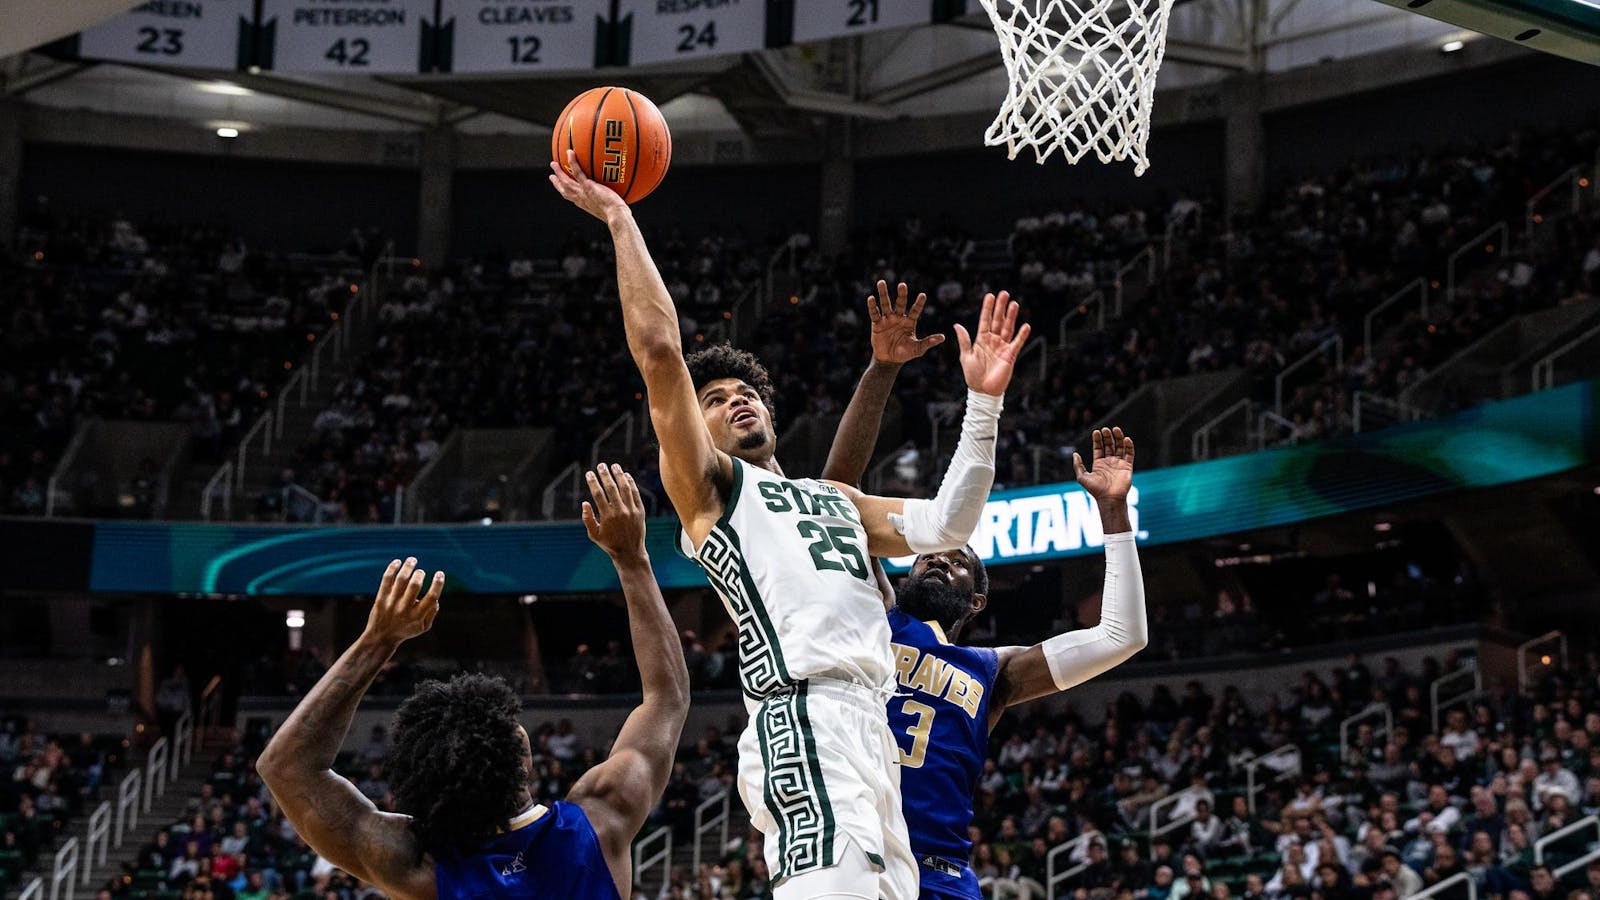 Downtime has come at the right time for MSU men’s basketball heading into conference play – The State News